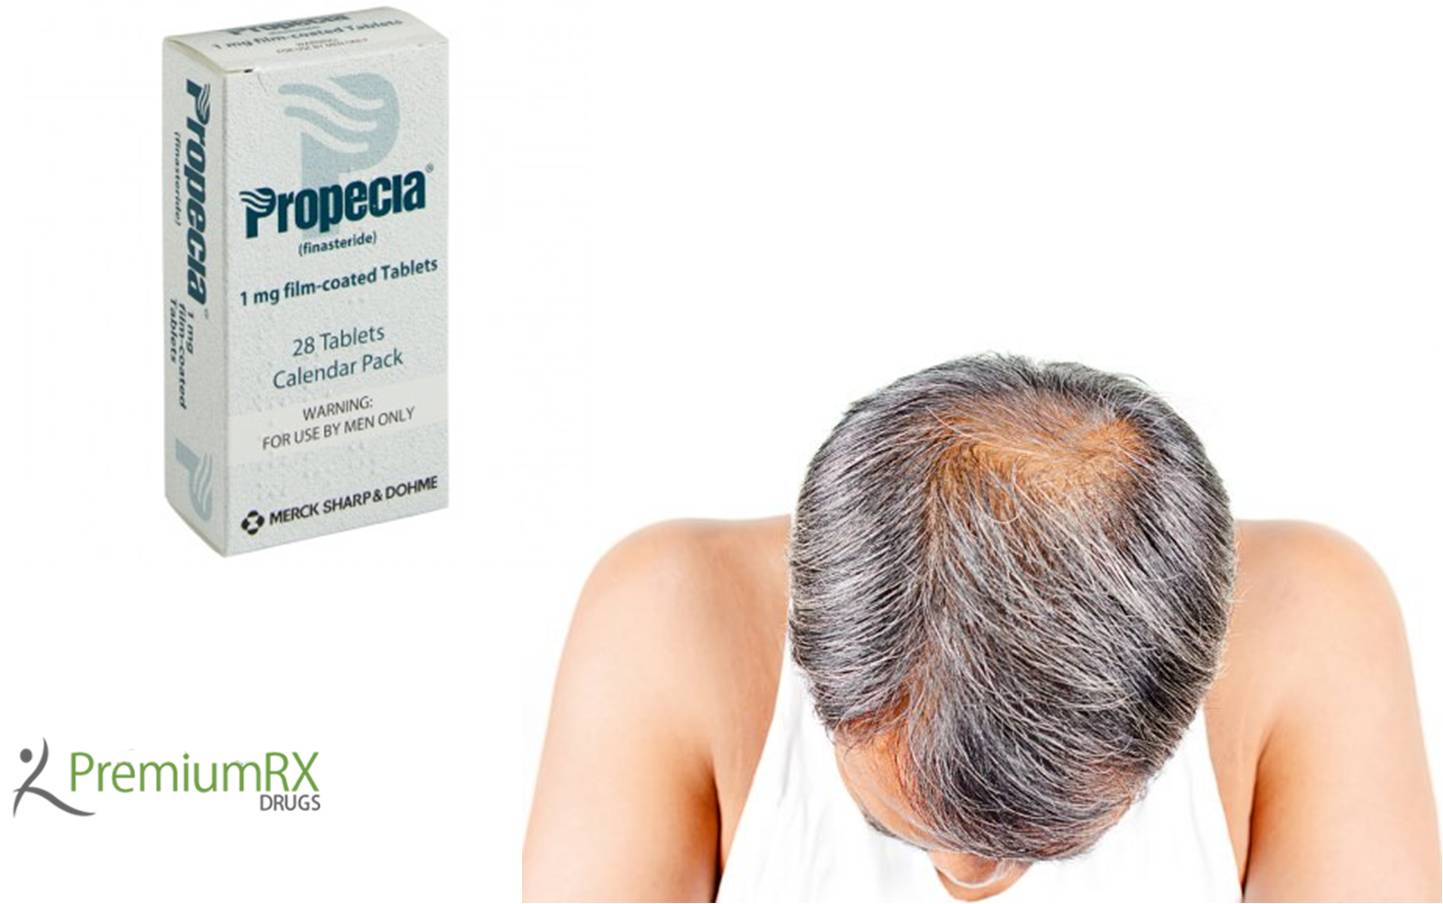 Where to Buy Propecia Online in the USA